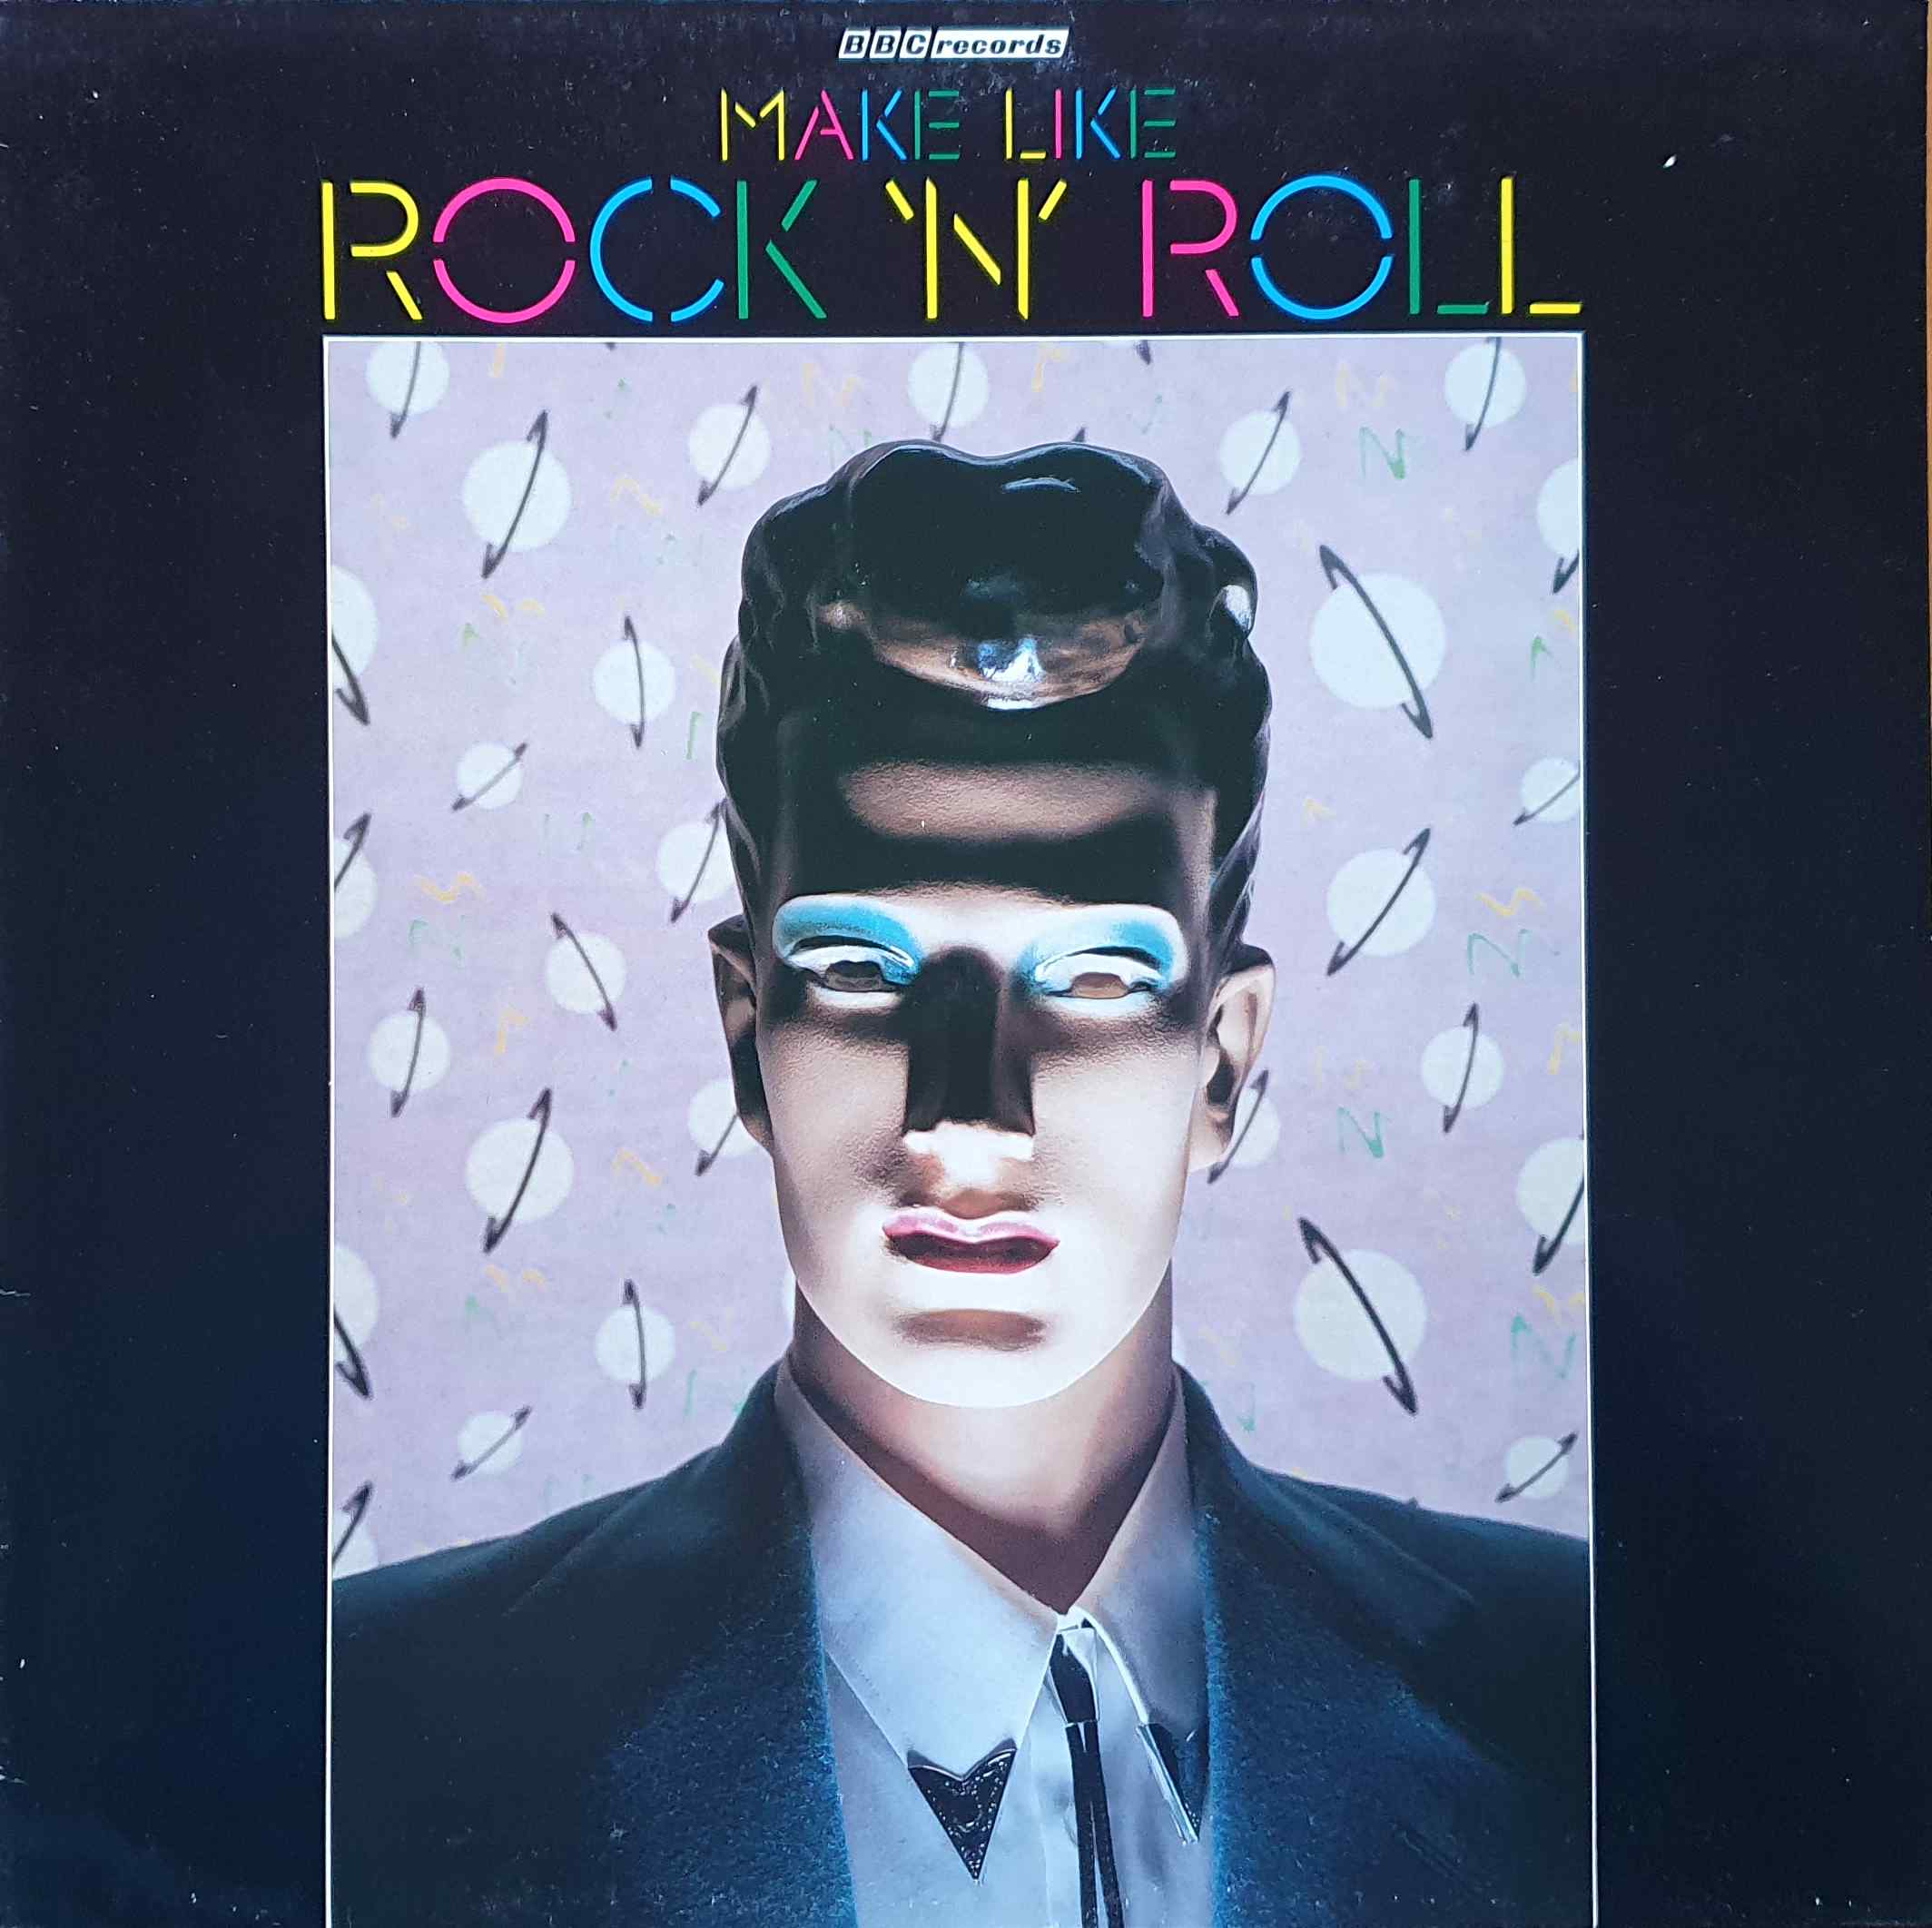 Picture of INT 128.013 Make like rock 'n' roll by artist Various from the BBC albums - Records and Tapes library